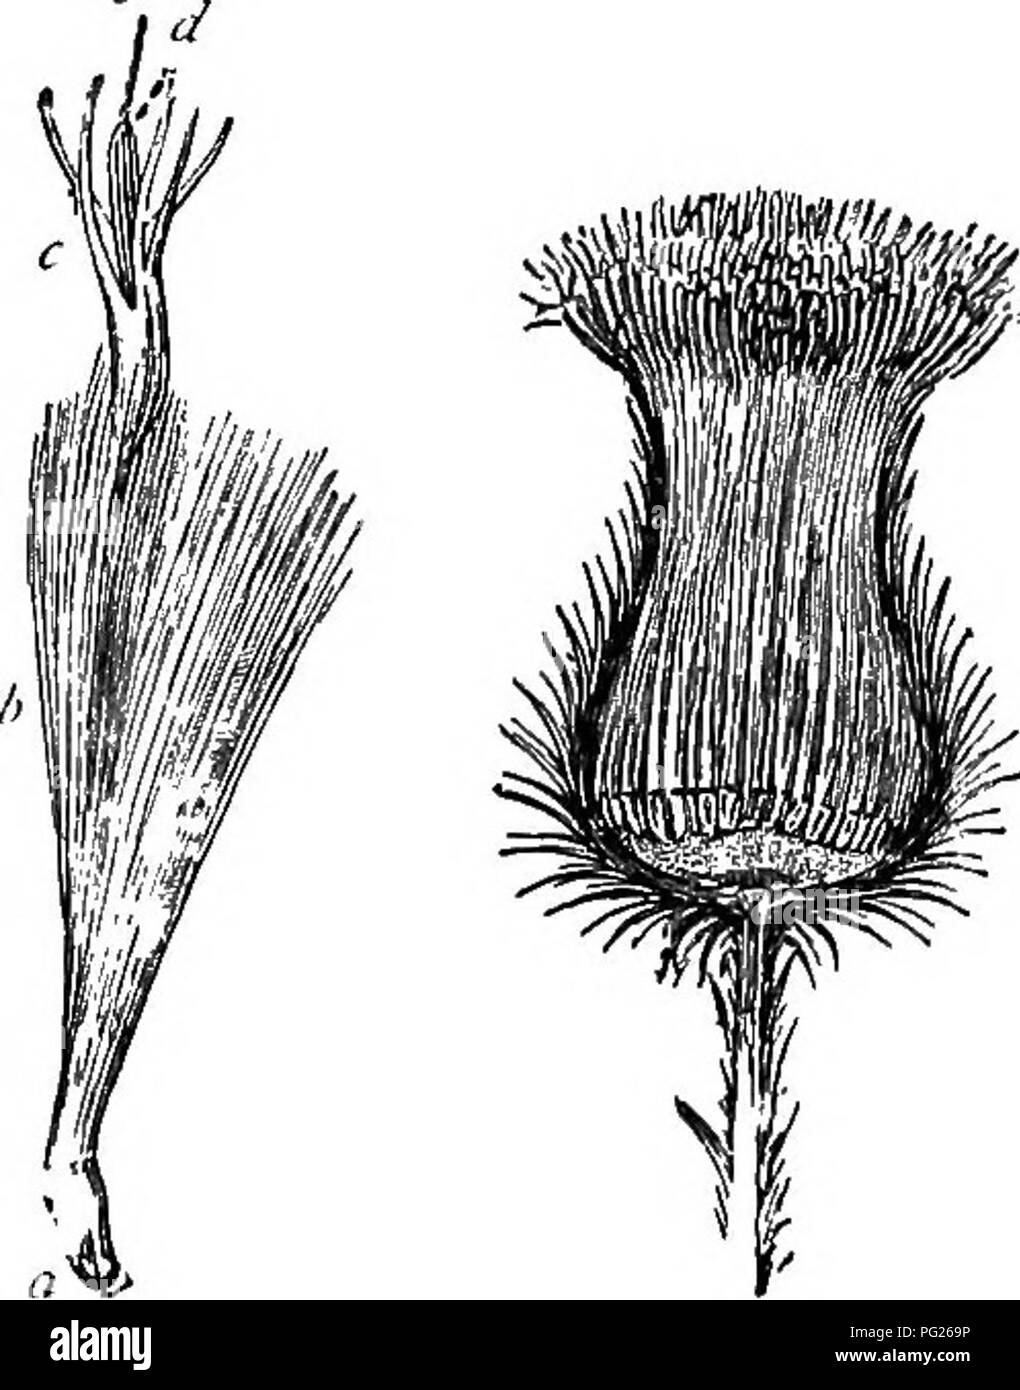 . Beginners' botany. Botany. Fig. -Head of Sunflower. florets are inclosed in a more or less dense and usually green involucre. In the thistle (Fig. 190) this involucre is prickly. A longitudinal section discloses the flo- rets, all attached at bot- tom to a common torus, and densely packed in the involucre. The pink tips of these florets con- stitute the showy part of the head. Each floret of the this- tle (Fig. 190) is a com- plete flower. At a is the ovary. At ^ is a much-divided plumy calyx, known as the pappus. The corolla is long- tubed, rising above the pappus, and is enlarged and 5-lob Stock Photo